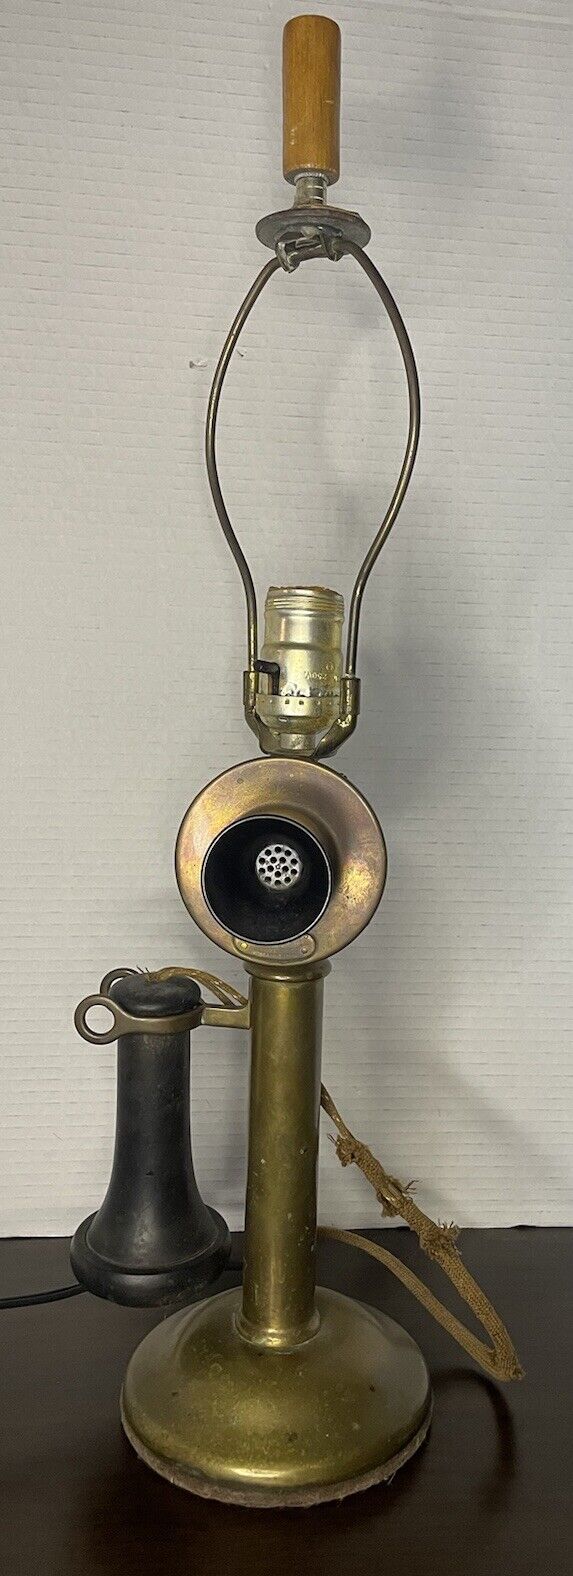 Antique American Tel &Tel Co 337 Brass Candlestick Phone Non-Working Lamp